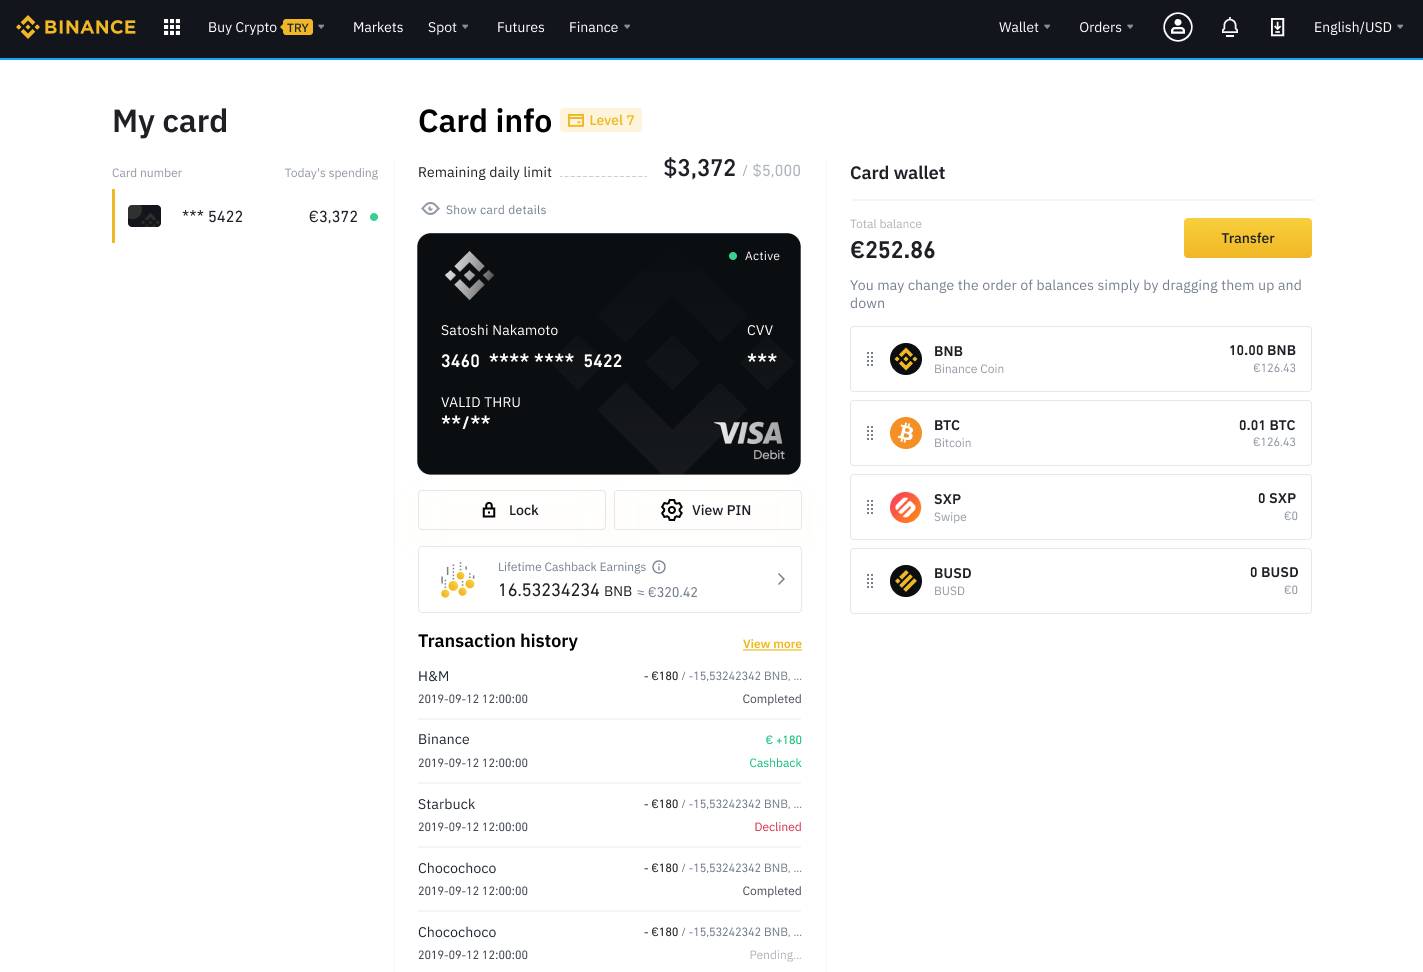 Binance Deposit Methods: Step-by-Step Guide to Buy Crypto via Fiat, Bank Card, and P2P